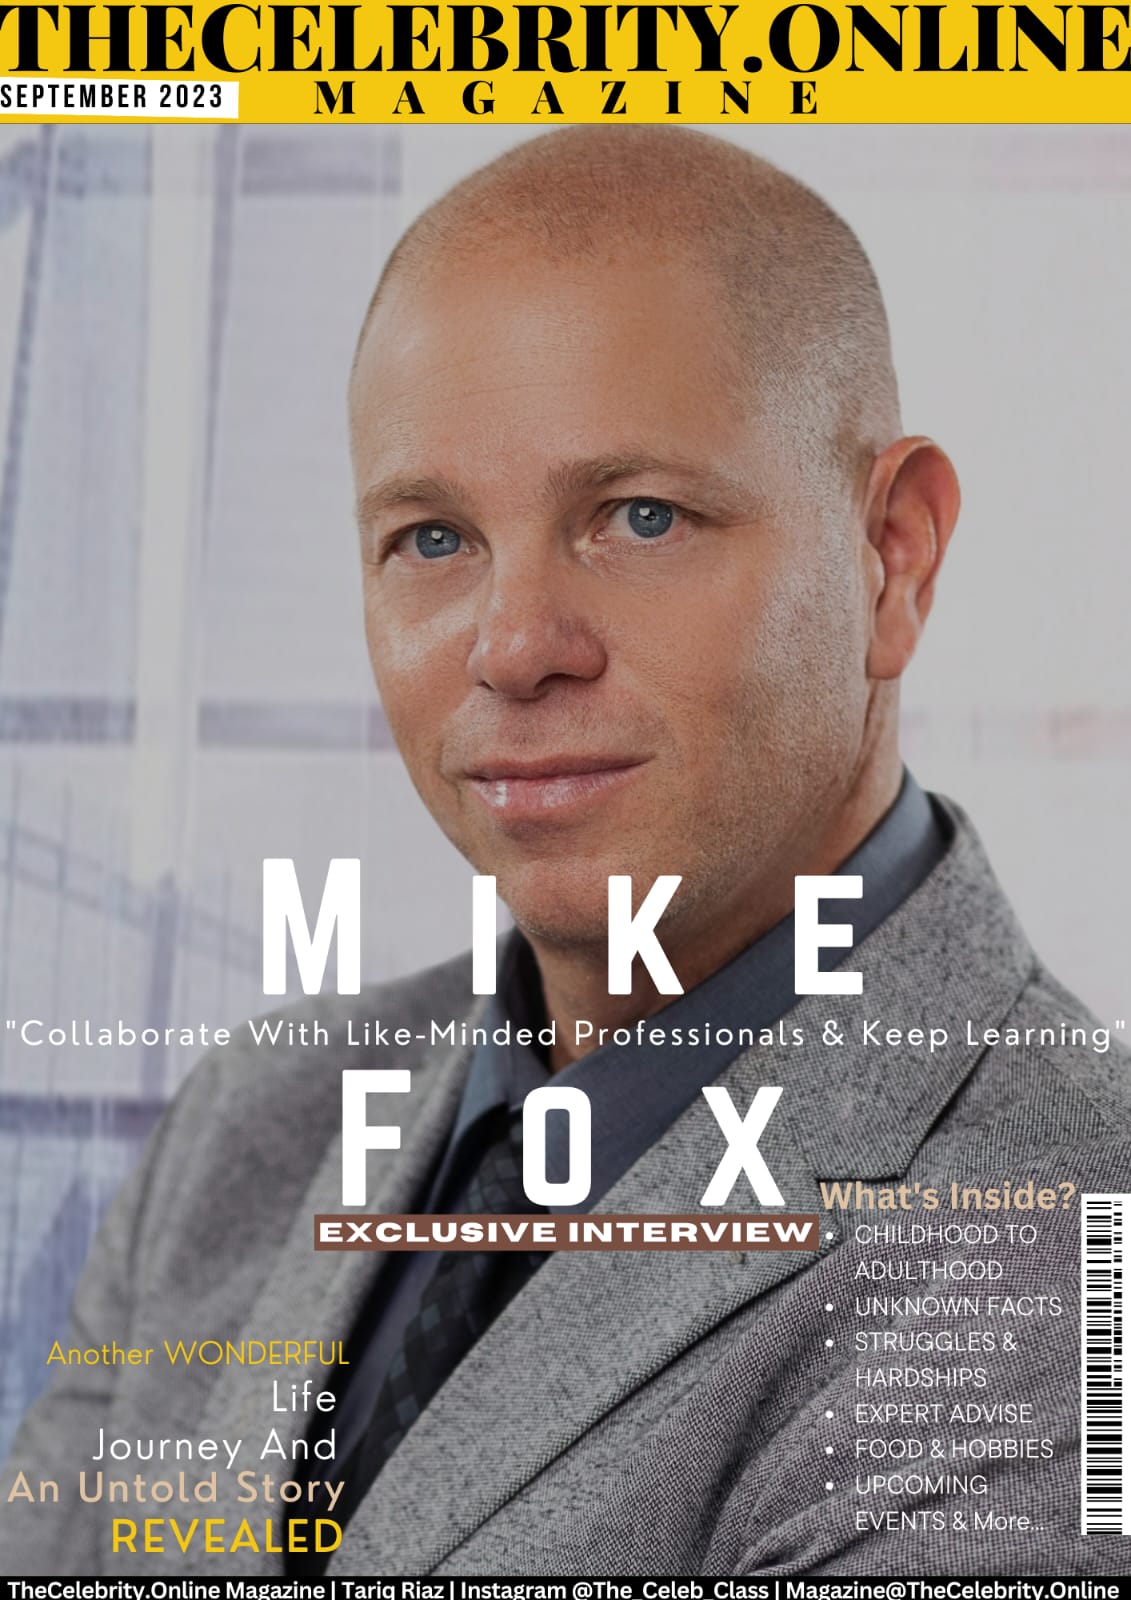 Mike Fox Exclusive Interview – ‘Collaborate With Like-Minded Professionals And Keep Learning’